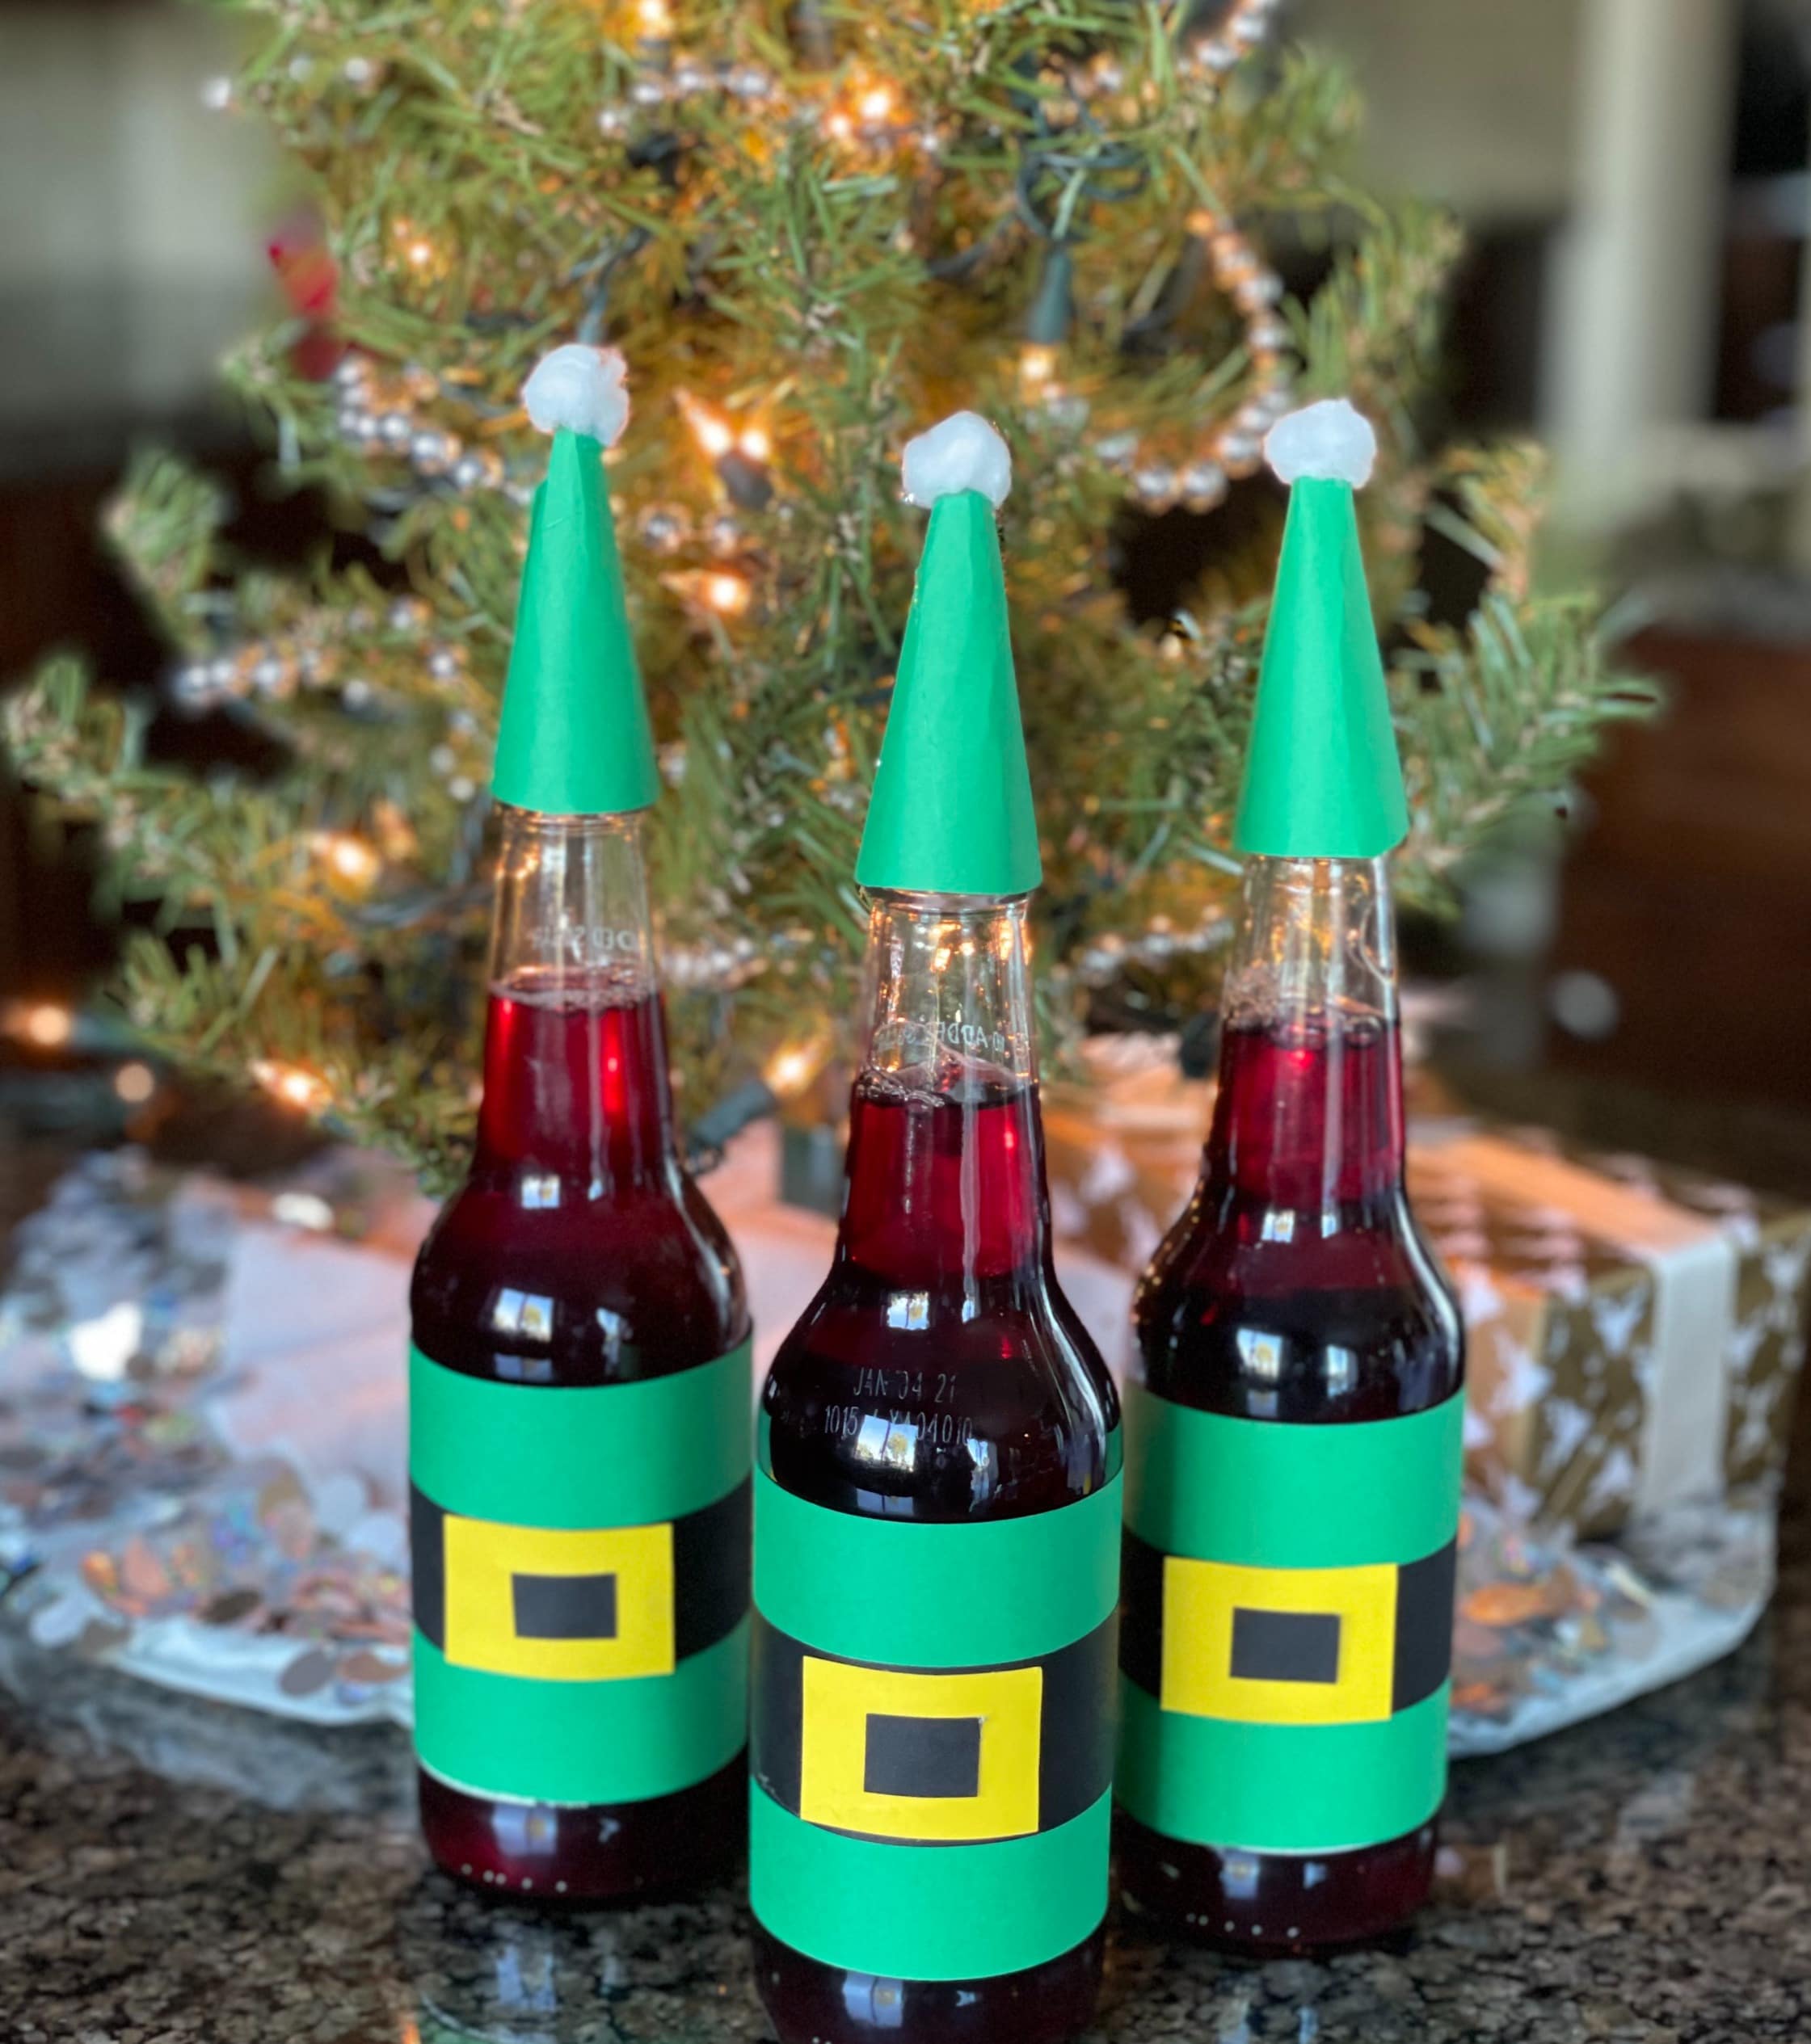 Glass soda bottles decorated in elf costumes